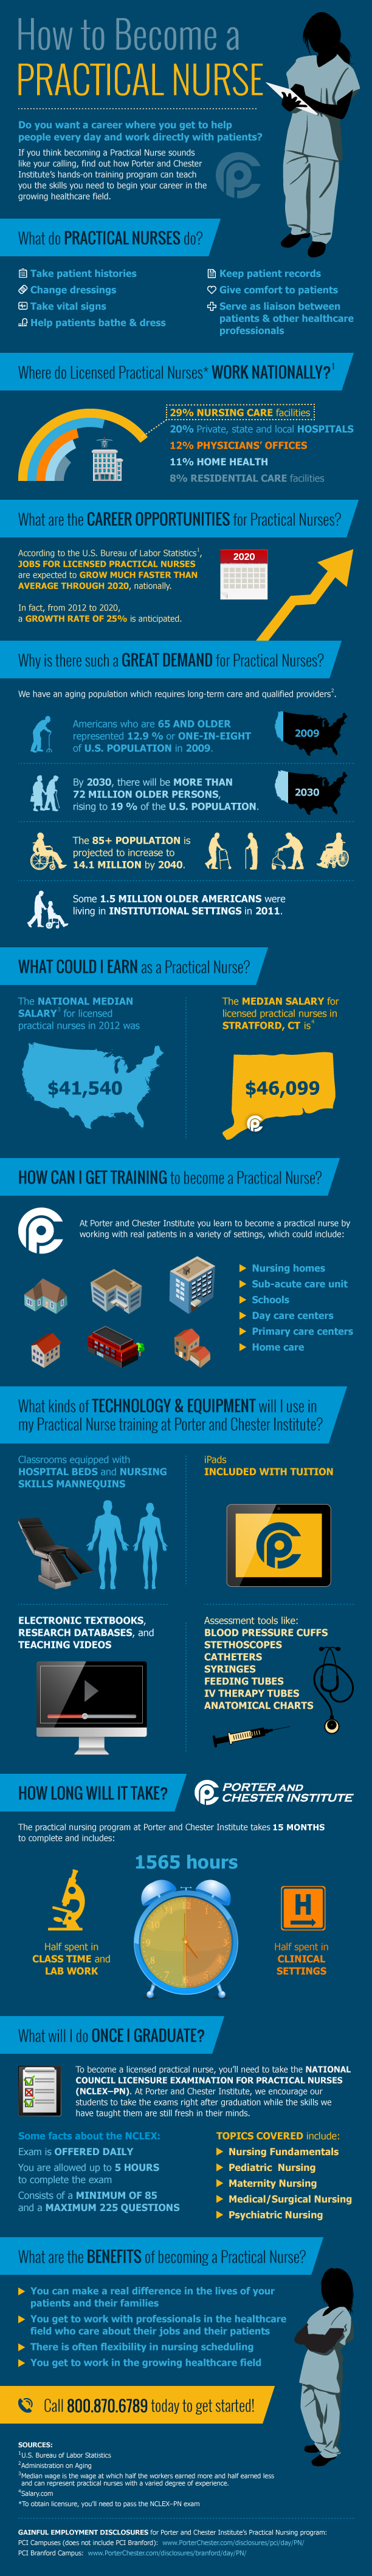 How to become a practical nurse infographic